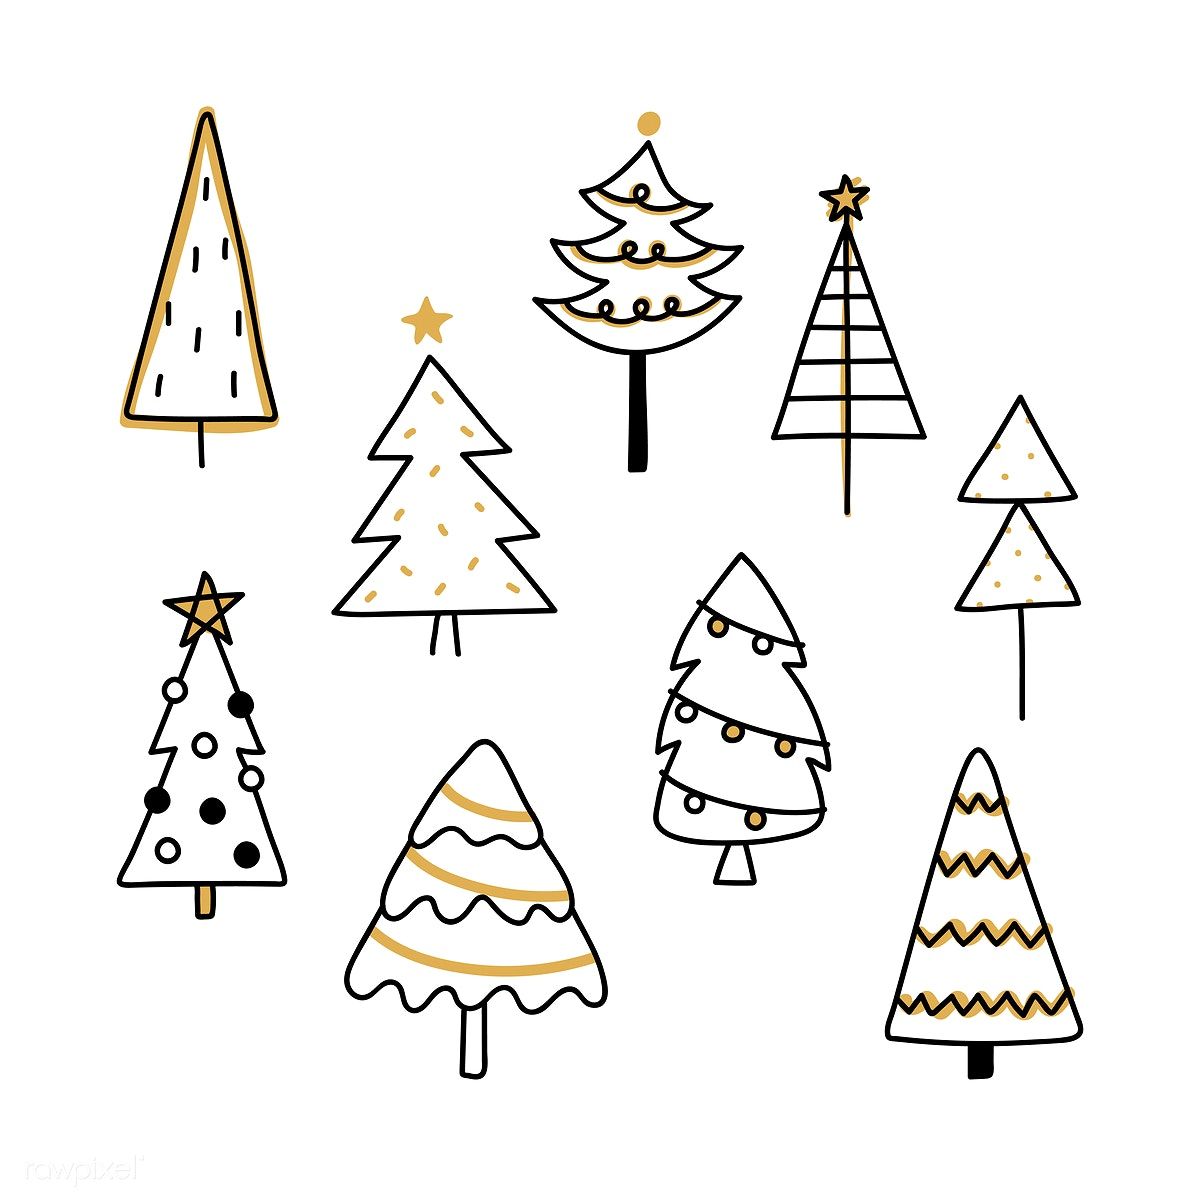 Download premium vector of Christmas pine tree pattern background drawing